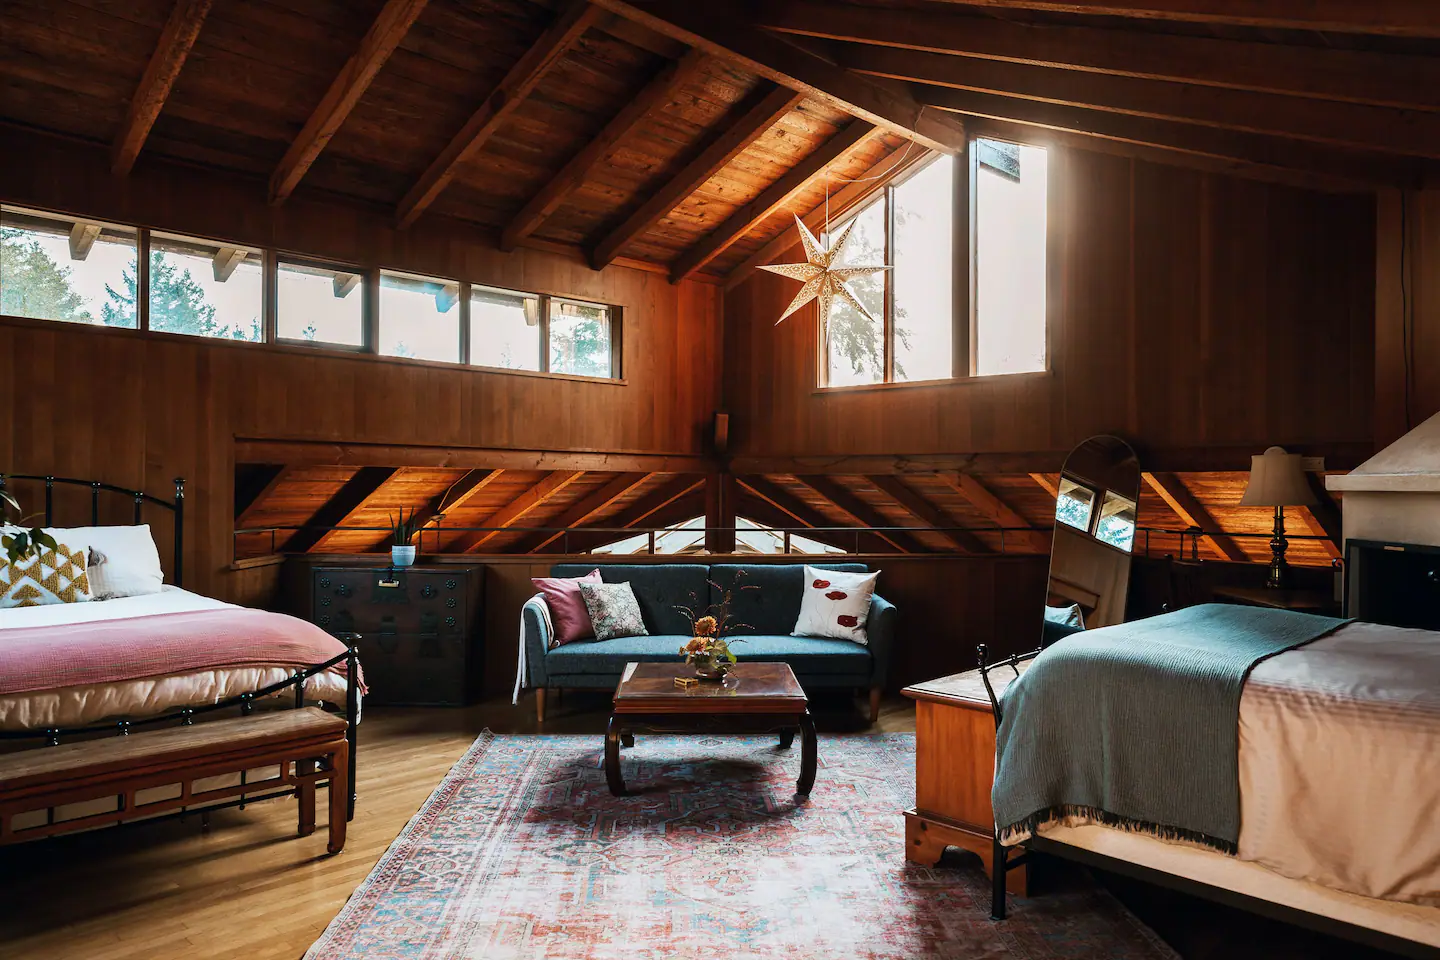 The light-filled loft offers two queen beds and two fold-down sofas.